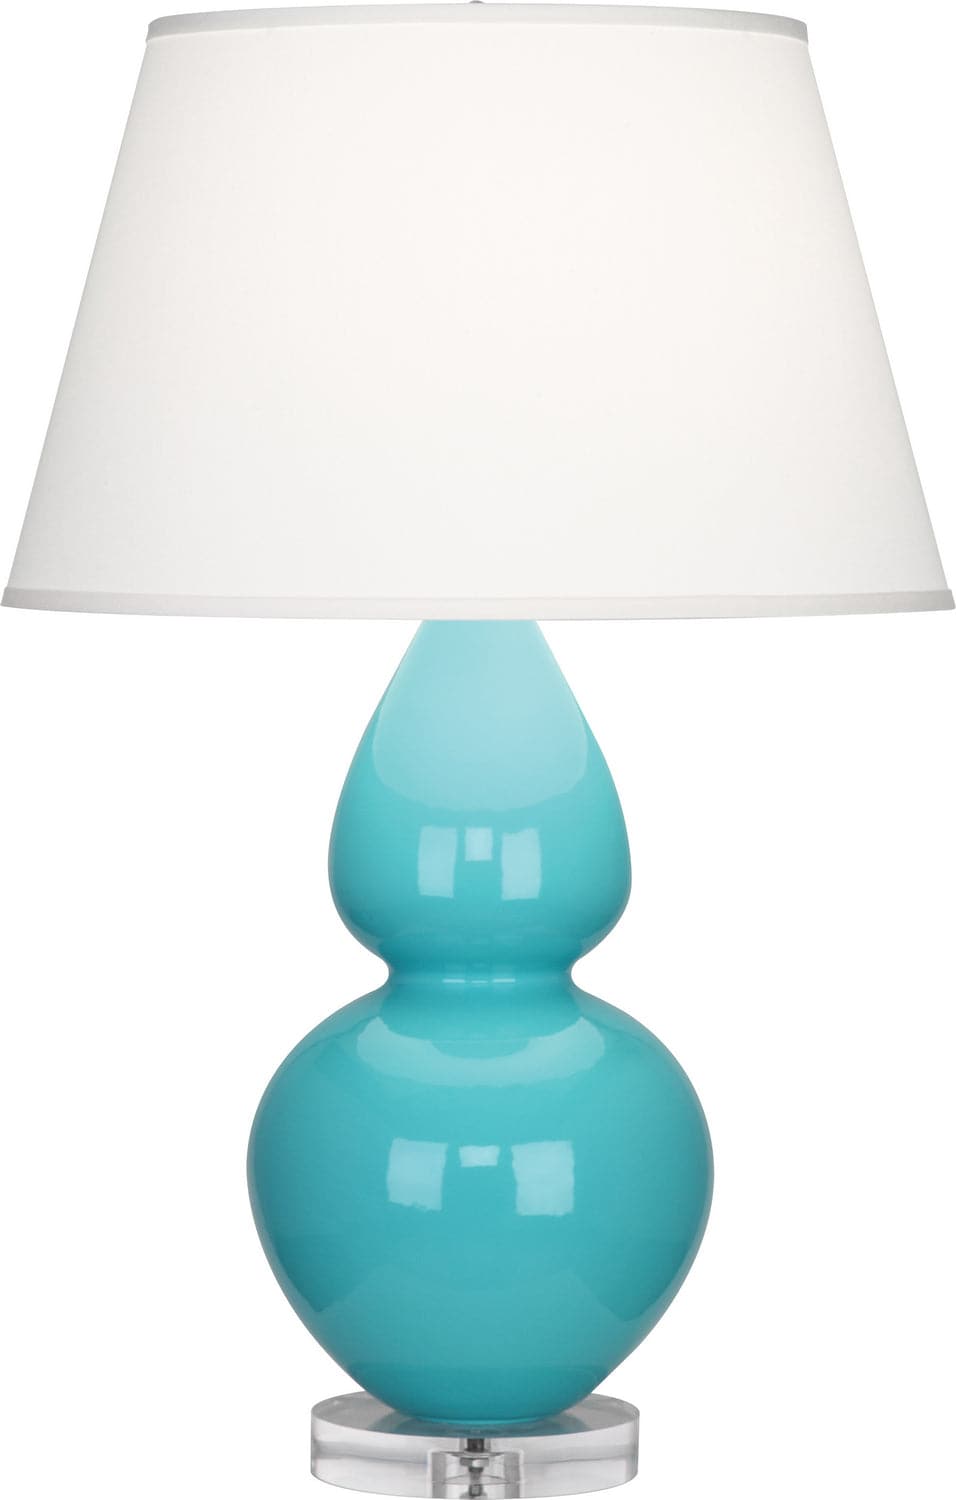 Robert Abbey - A741X - One Light Table Lamp - Double Gourd - Egg Blue Glazed w/Lucite Base